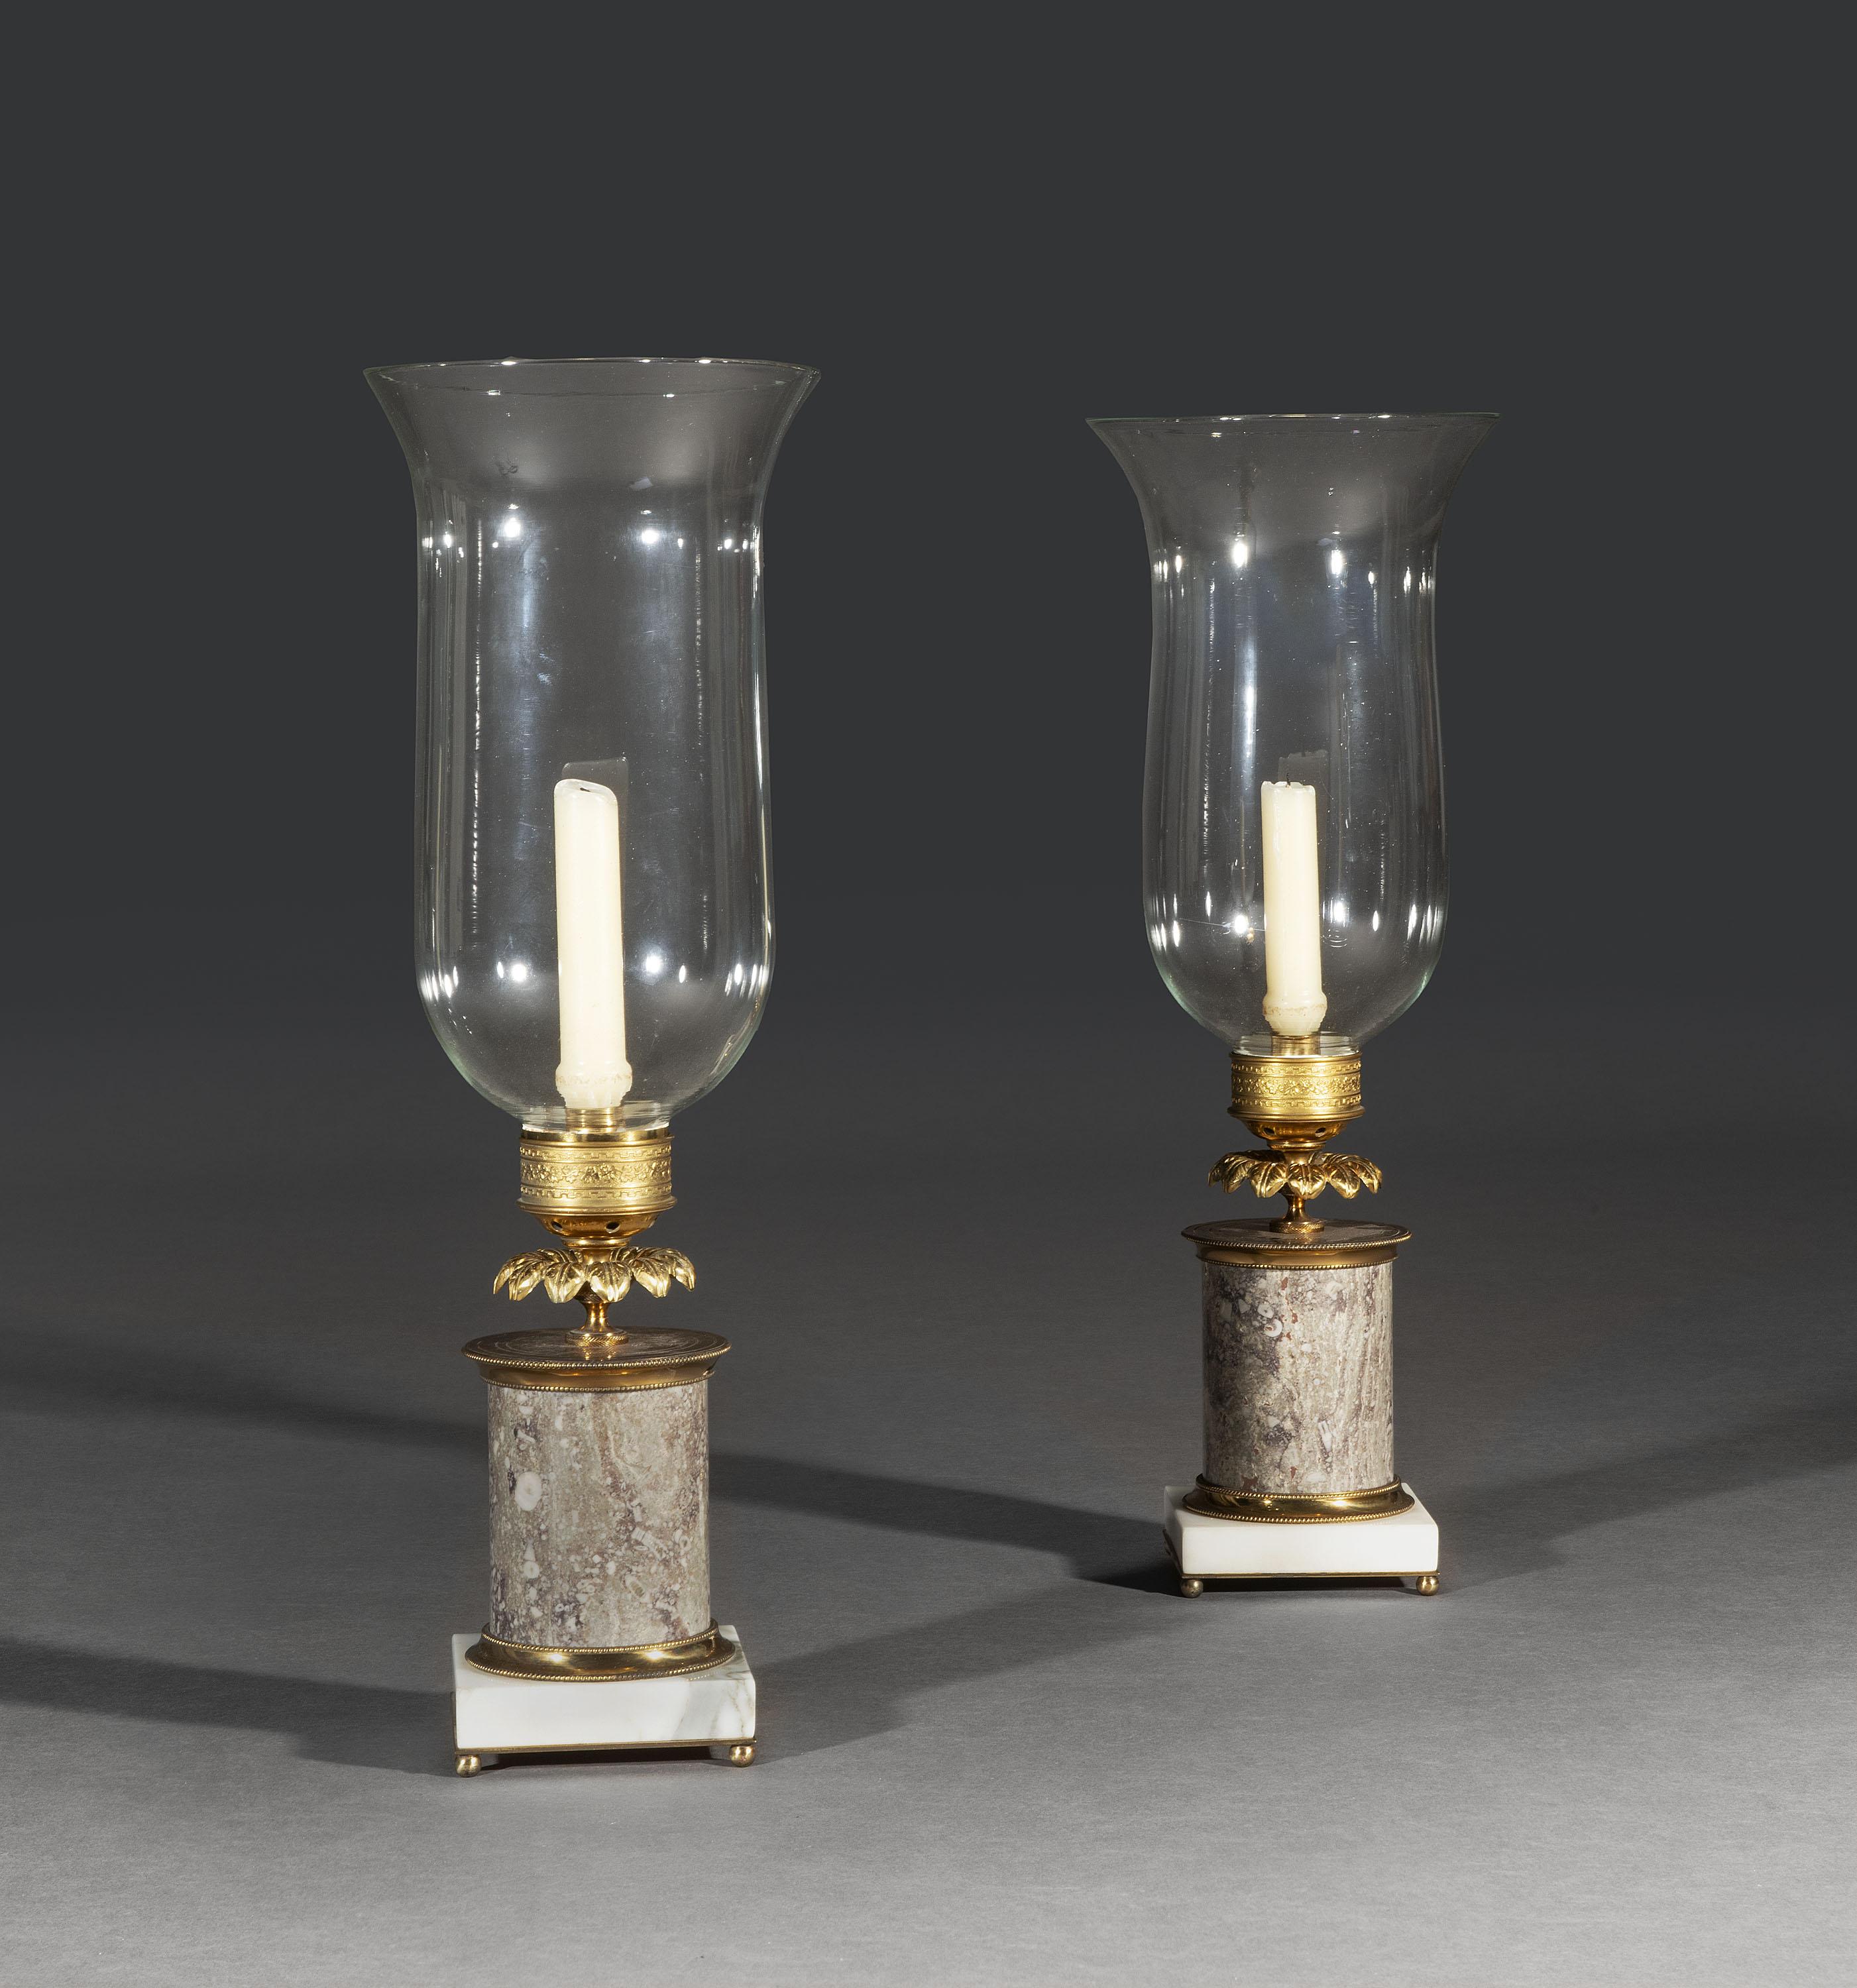 A rare pair of French ormolu and fossil marble table candlesticks with storm-shades with grey columns mounted on square white statuary marble bases with finely gilded mounts and ball feet, surmounted by leafy calyx and decorative sconces with their